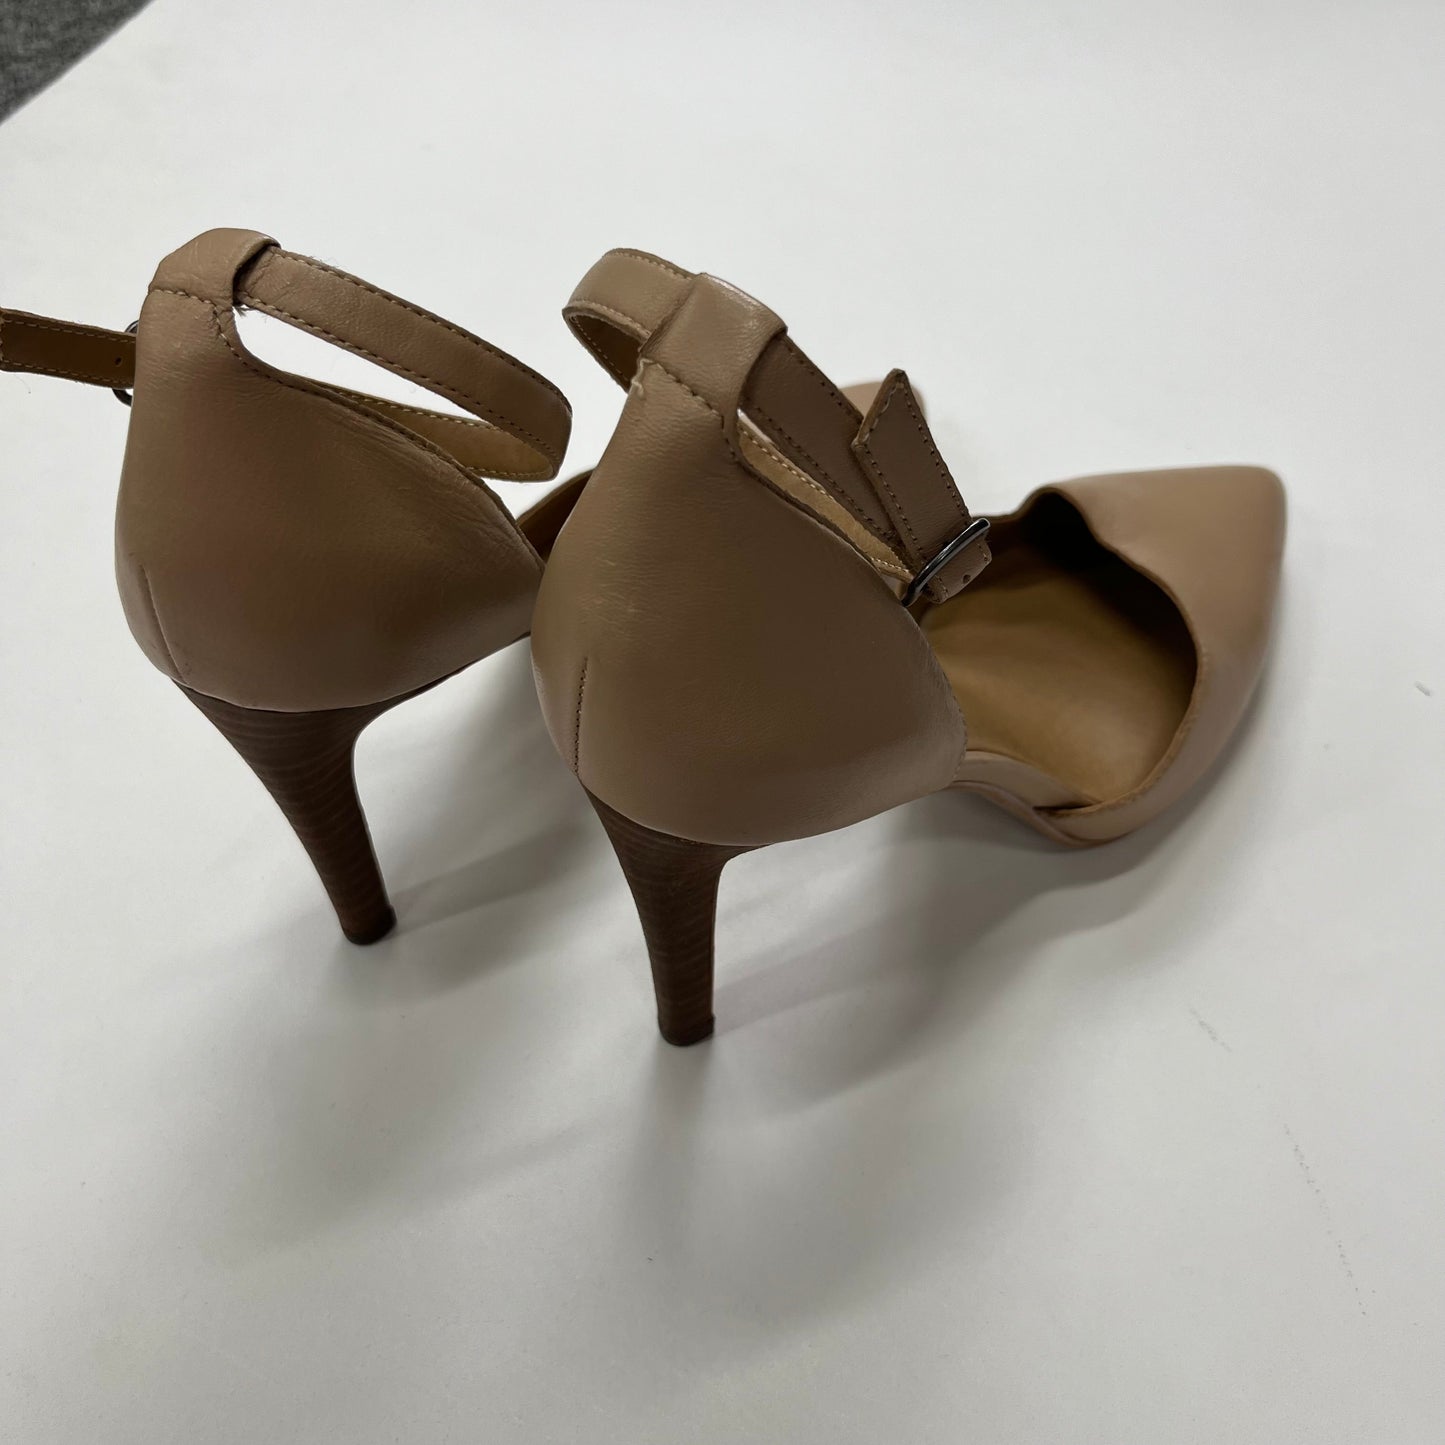 Tan Shoes Heels D Orsay Lucky Brand, Size 8